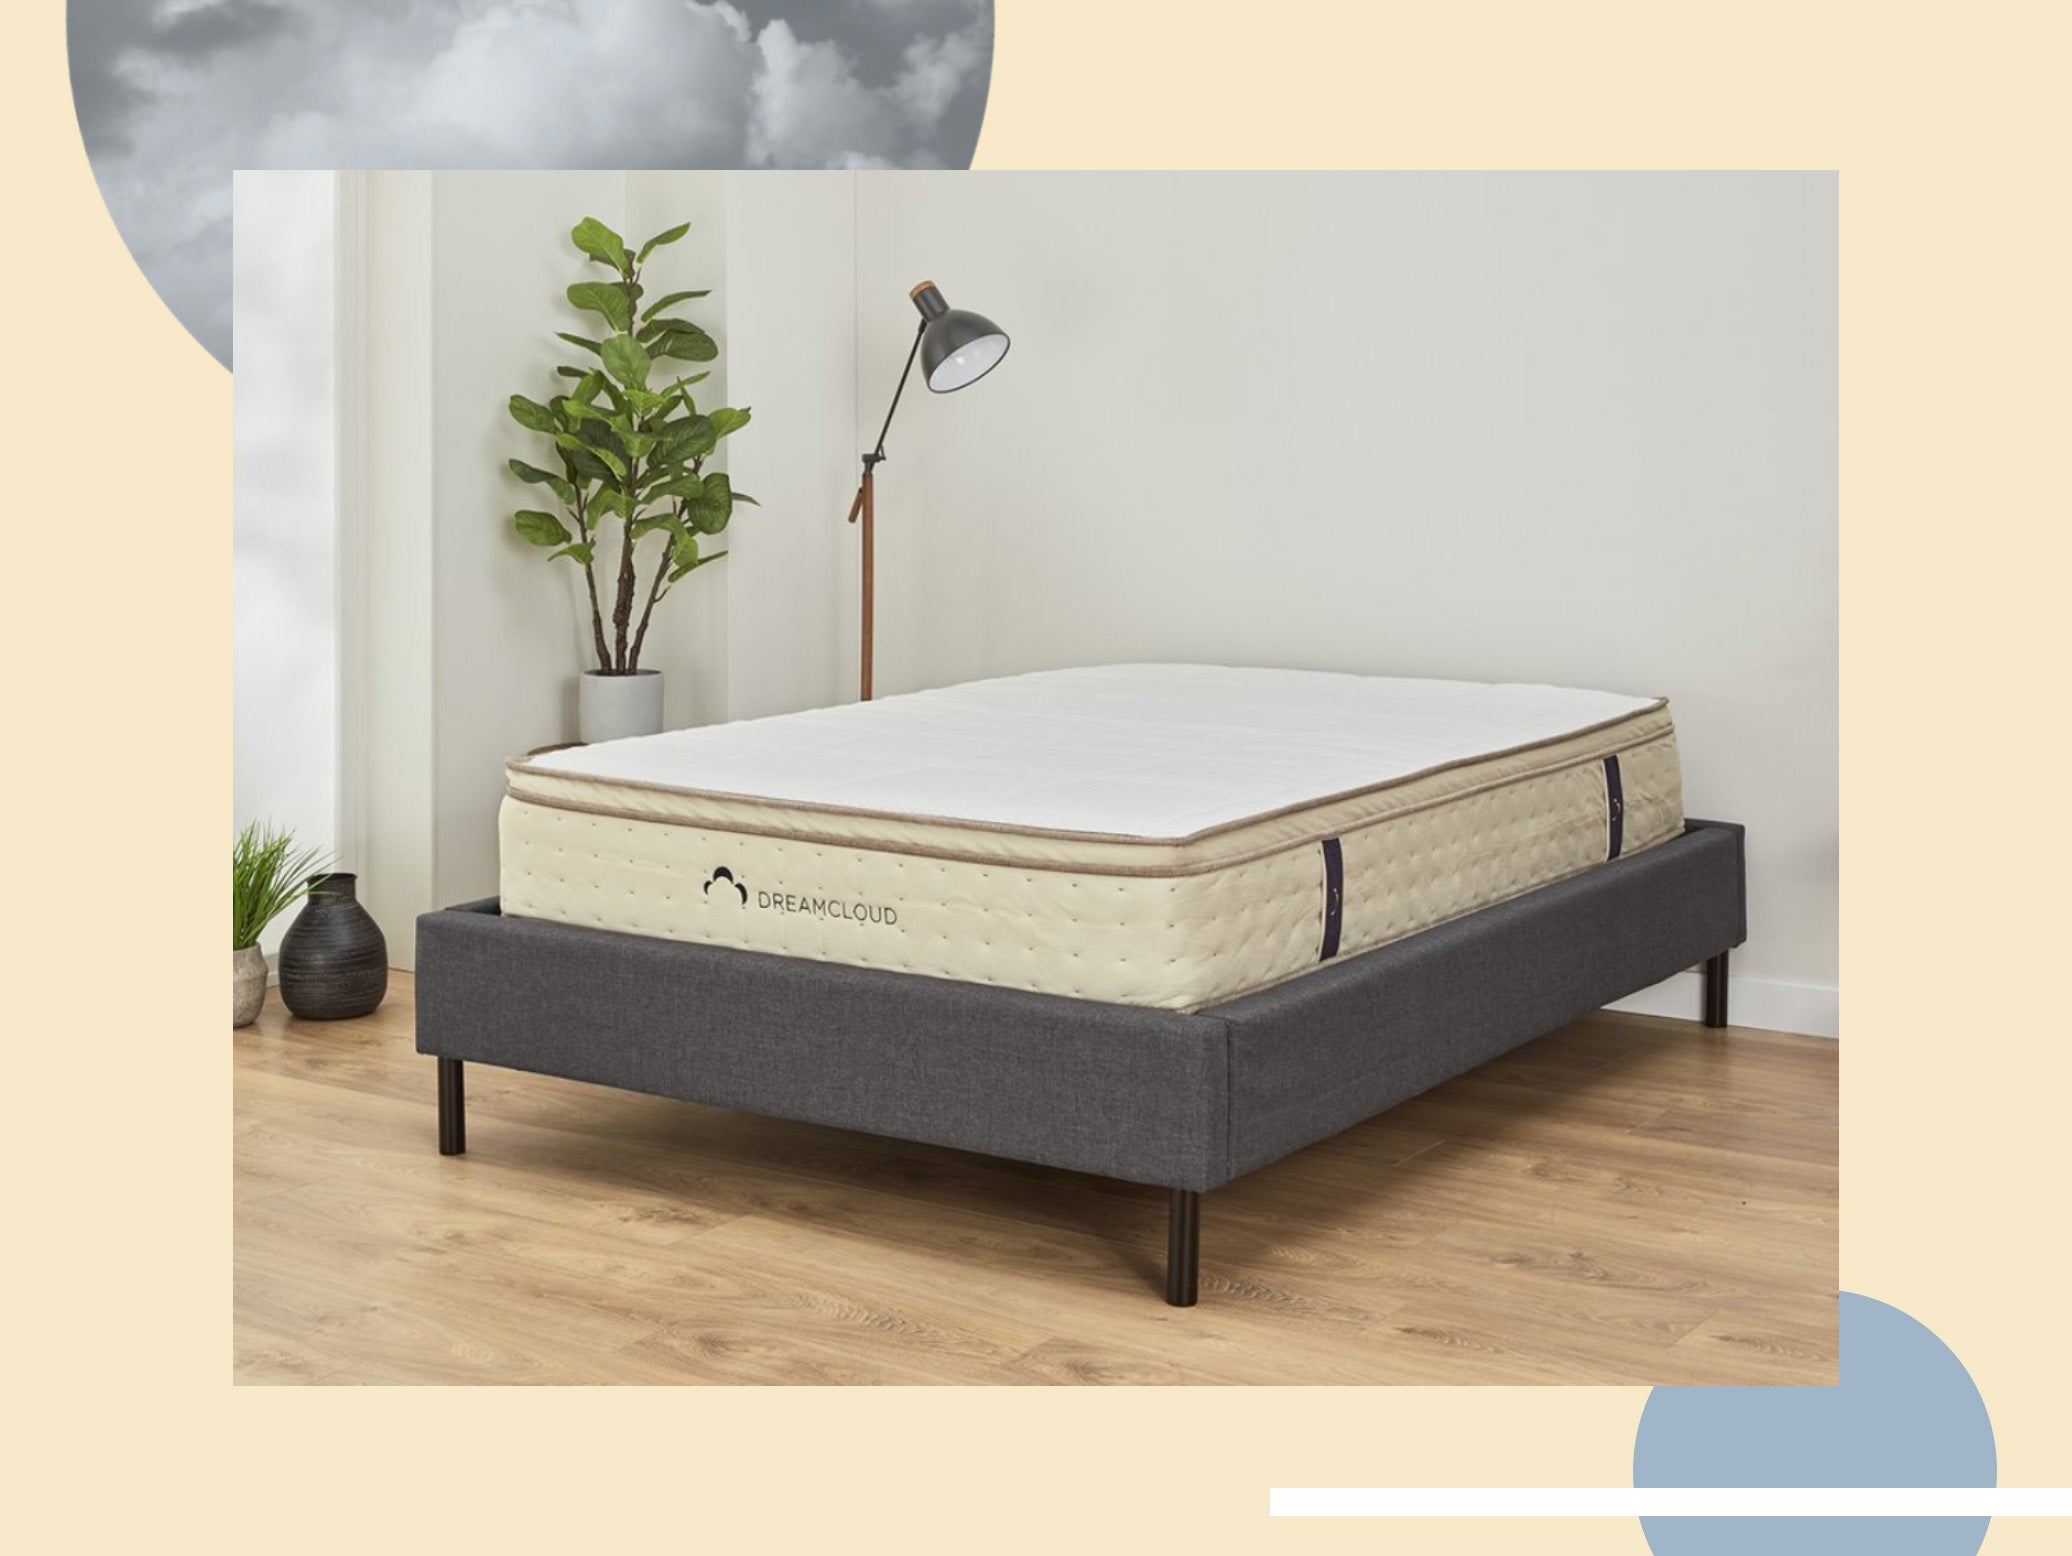 Get ready for a great night’s sleep with this multi-layered mattress